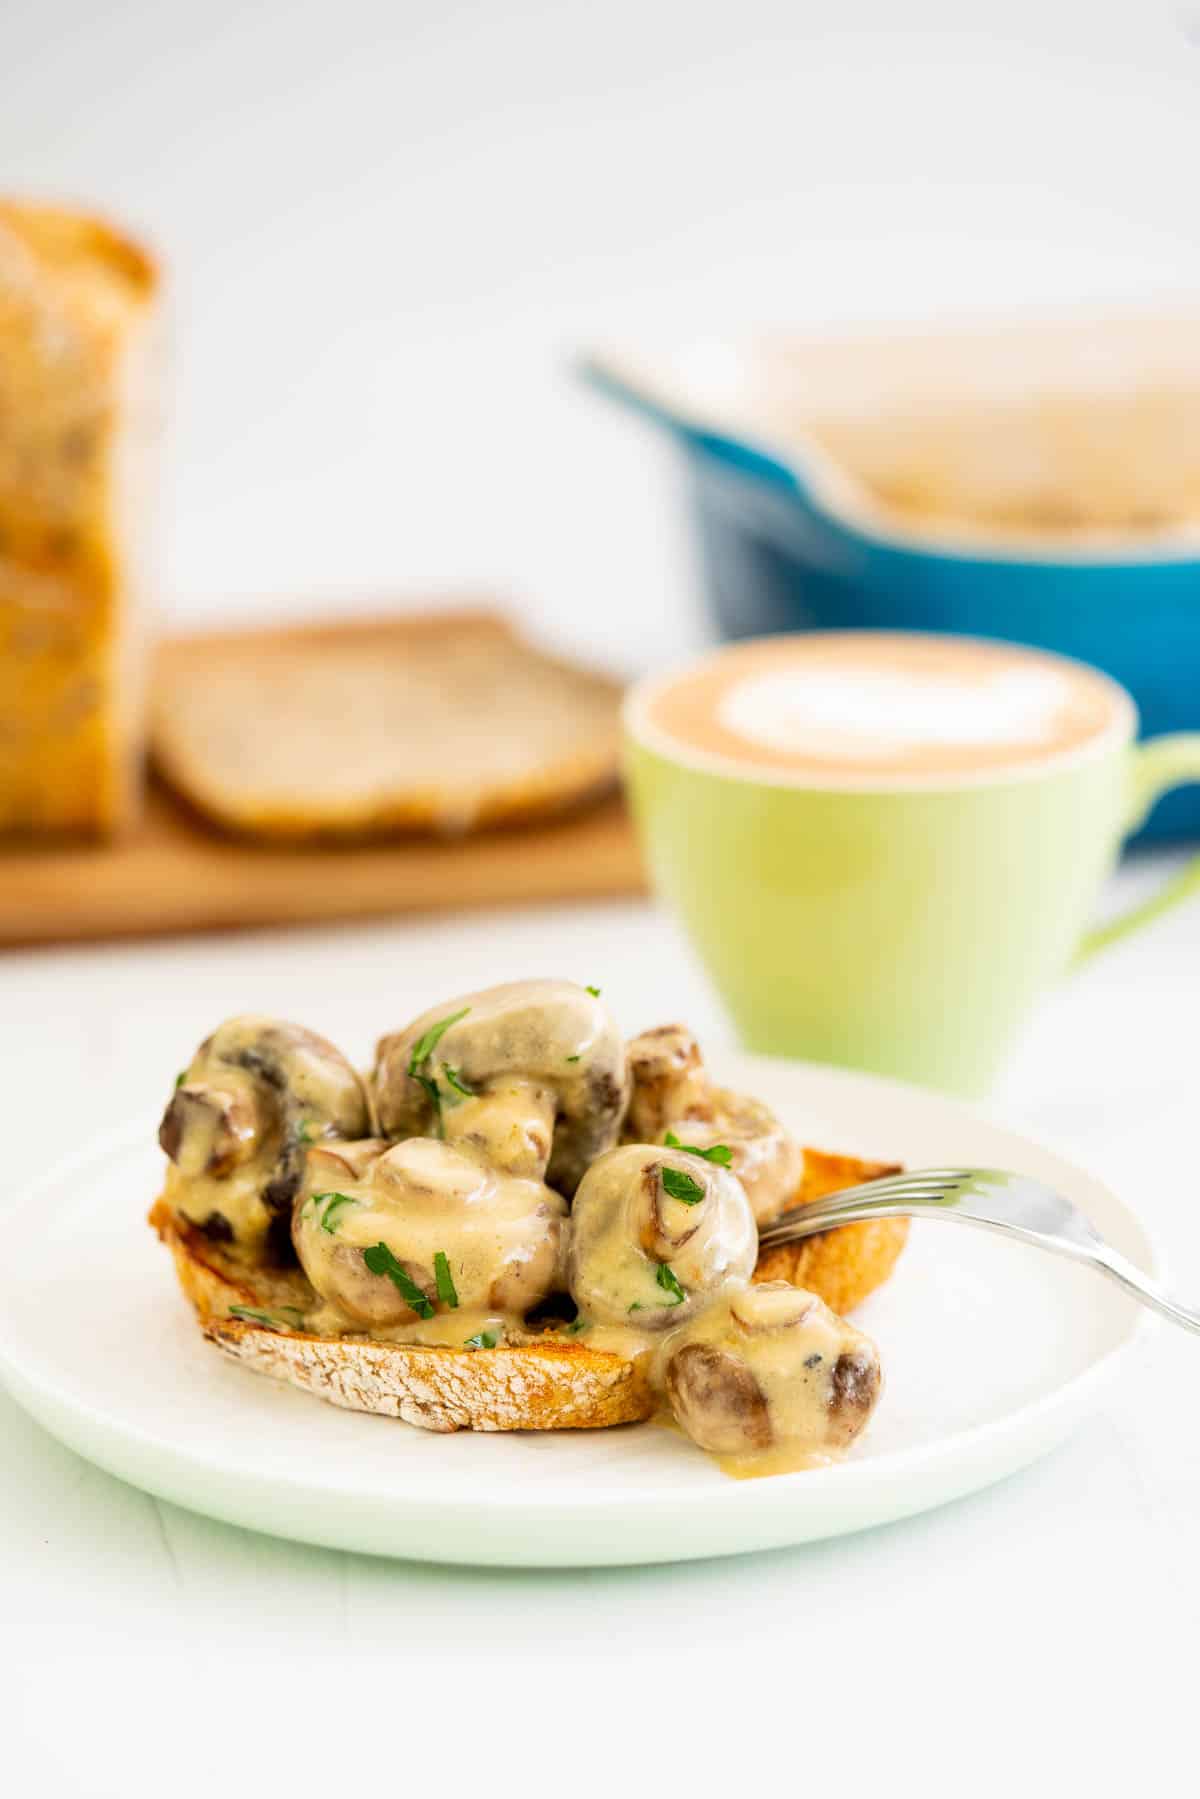 Creamy roast mushrooms on grainy toast, a cup of coffee and loaf of bread in the background.